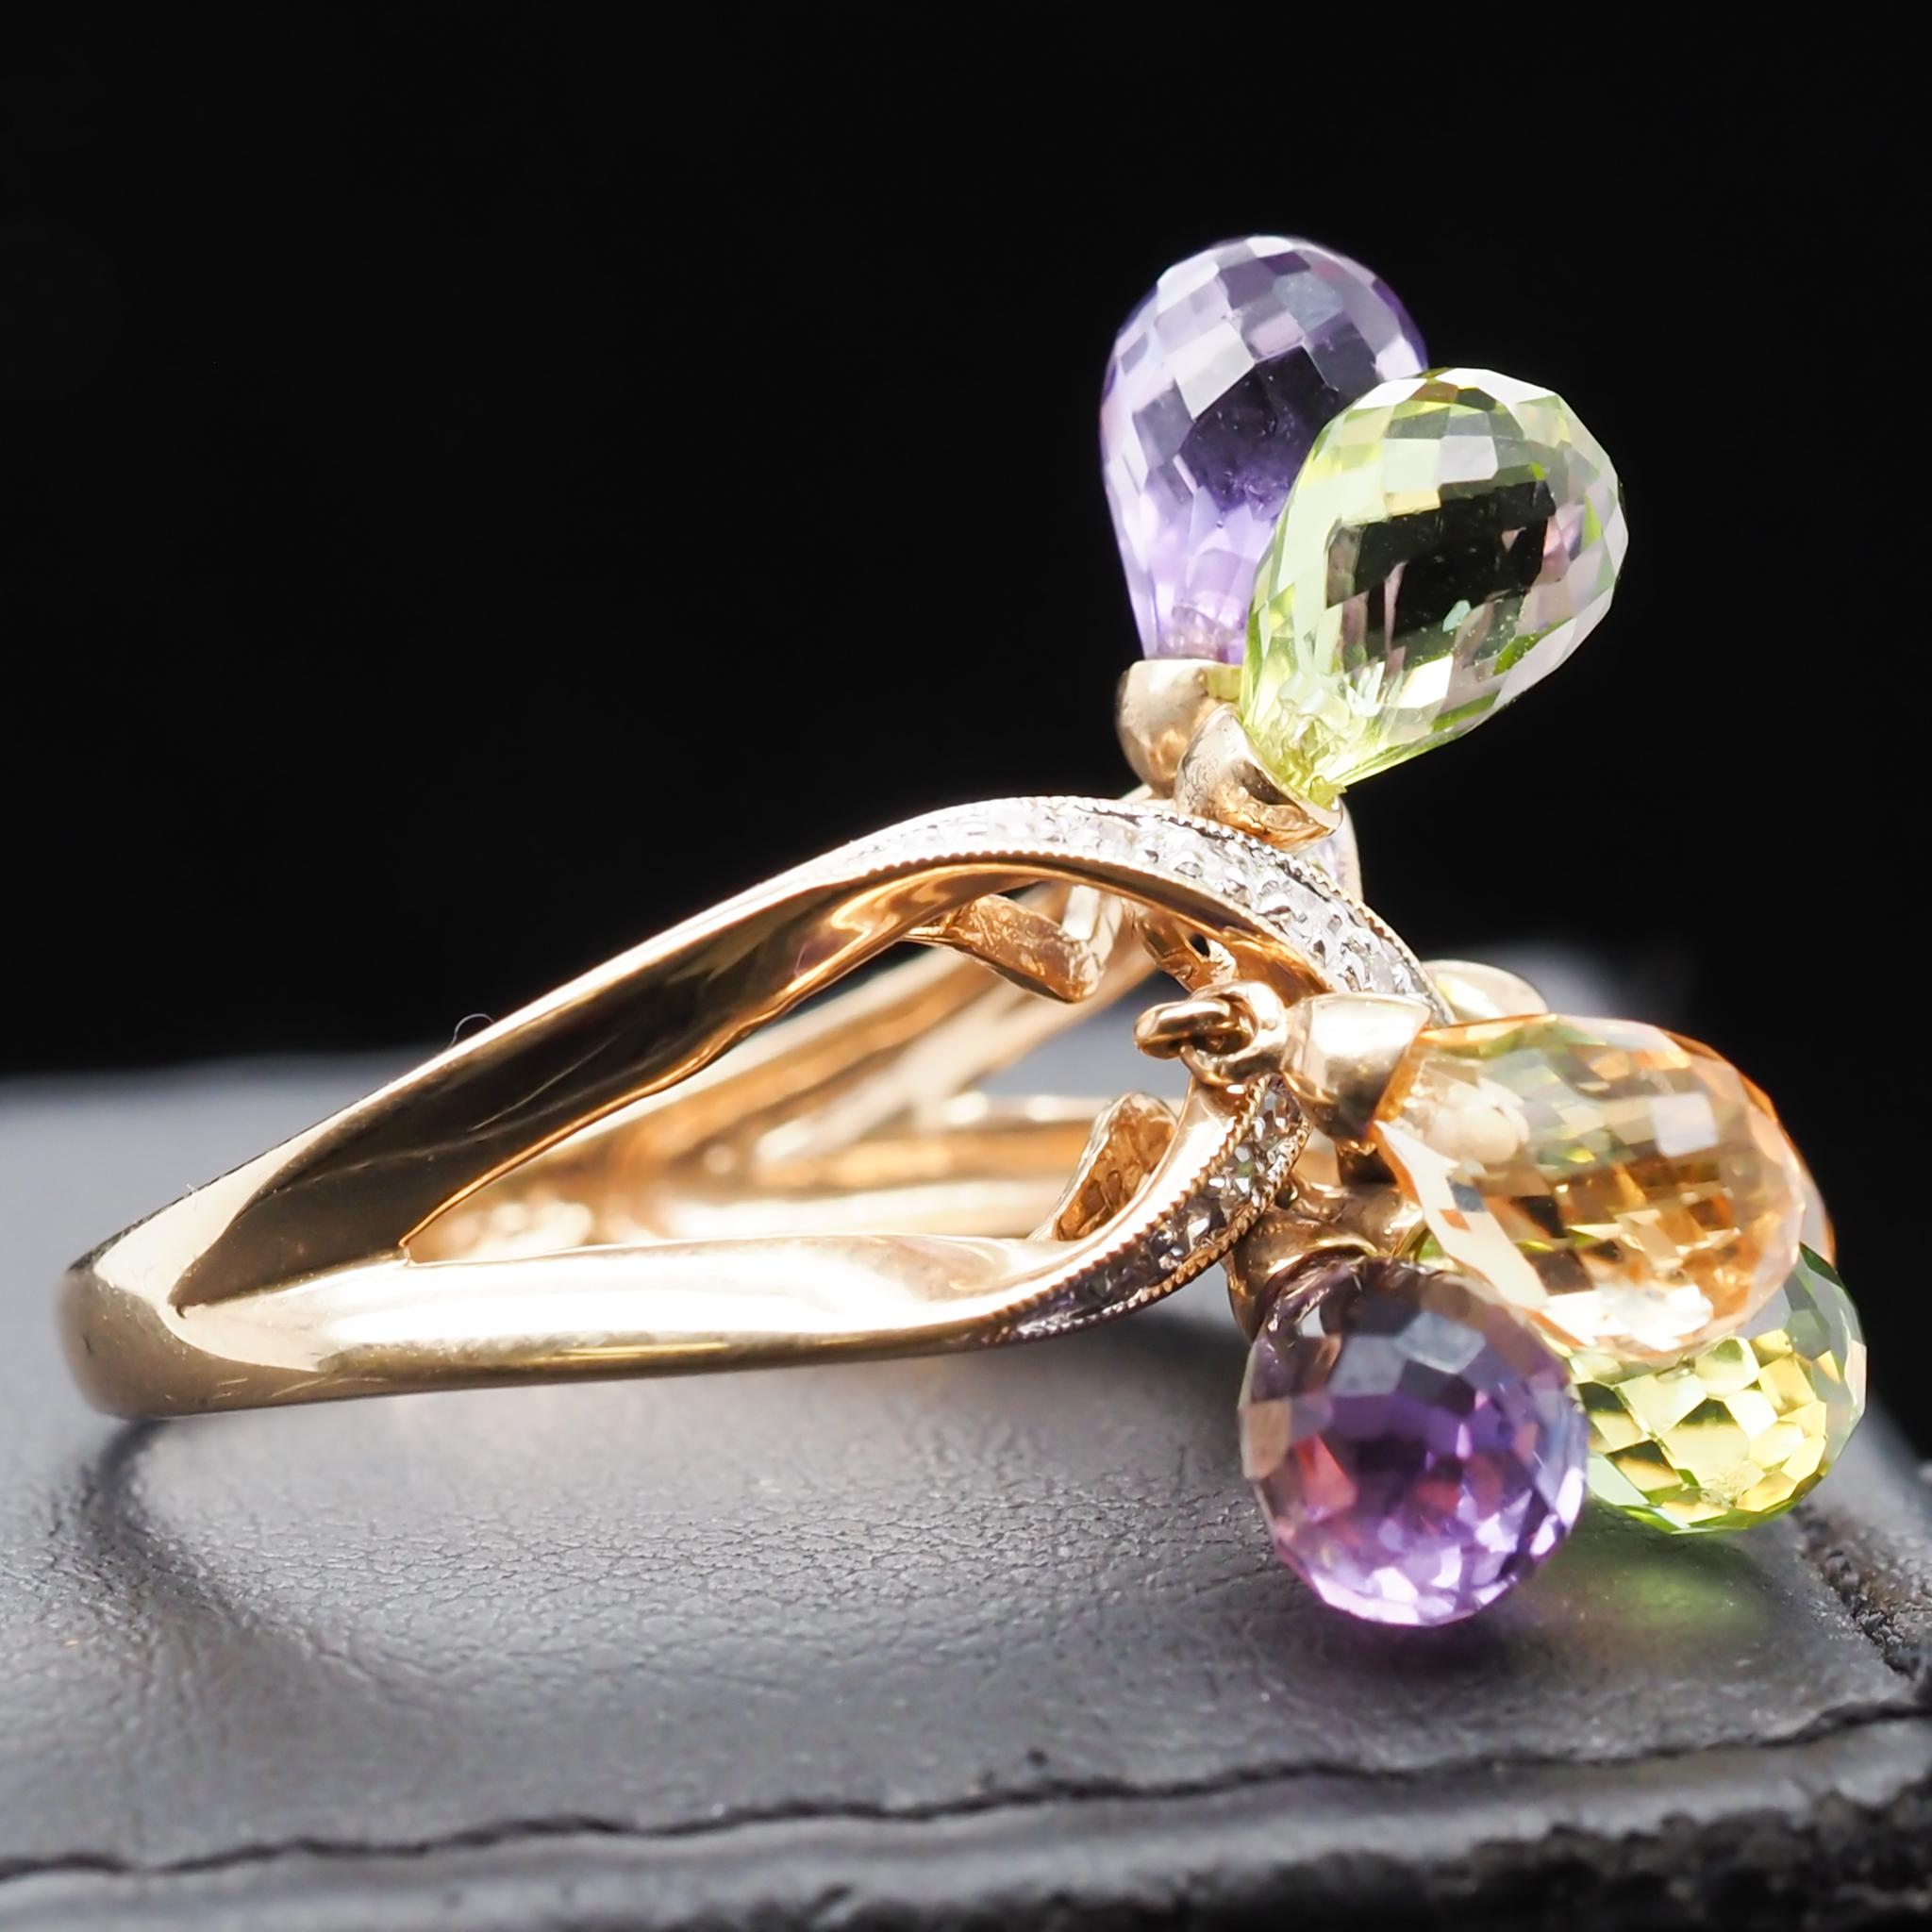 Contemporary 14 Karat Yellow Gold Diamond and Dangling Citrine, Amethyst and Peridot Ring For Sale